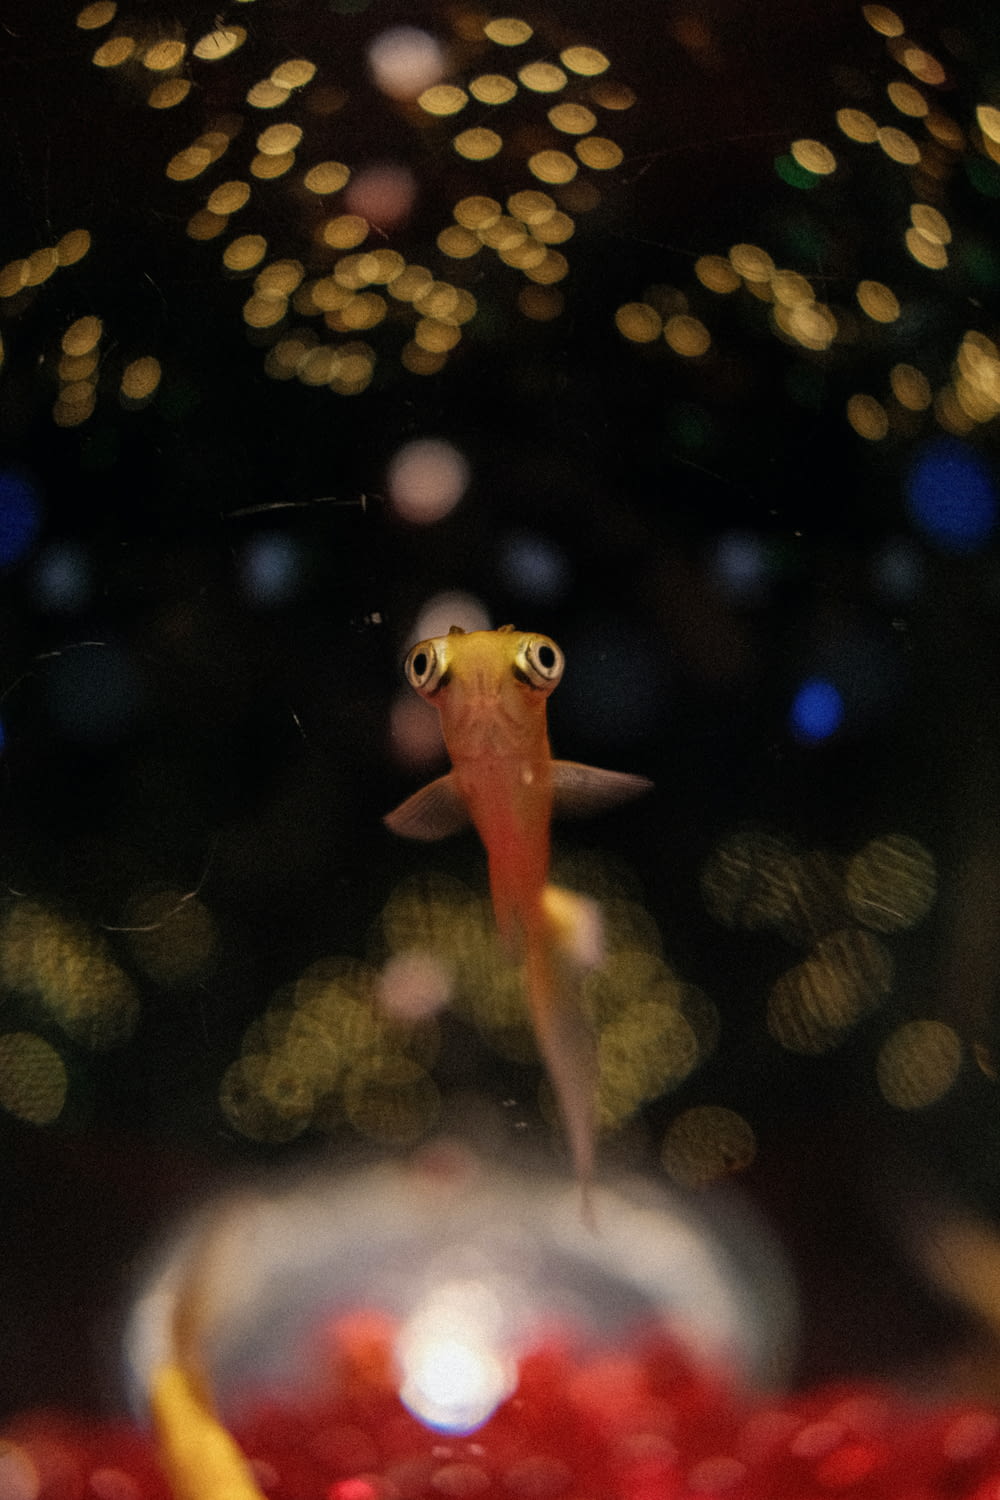 a goldfish in a fish bowl with lights in the background